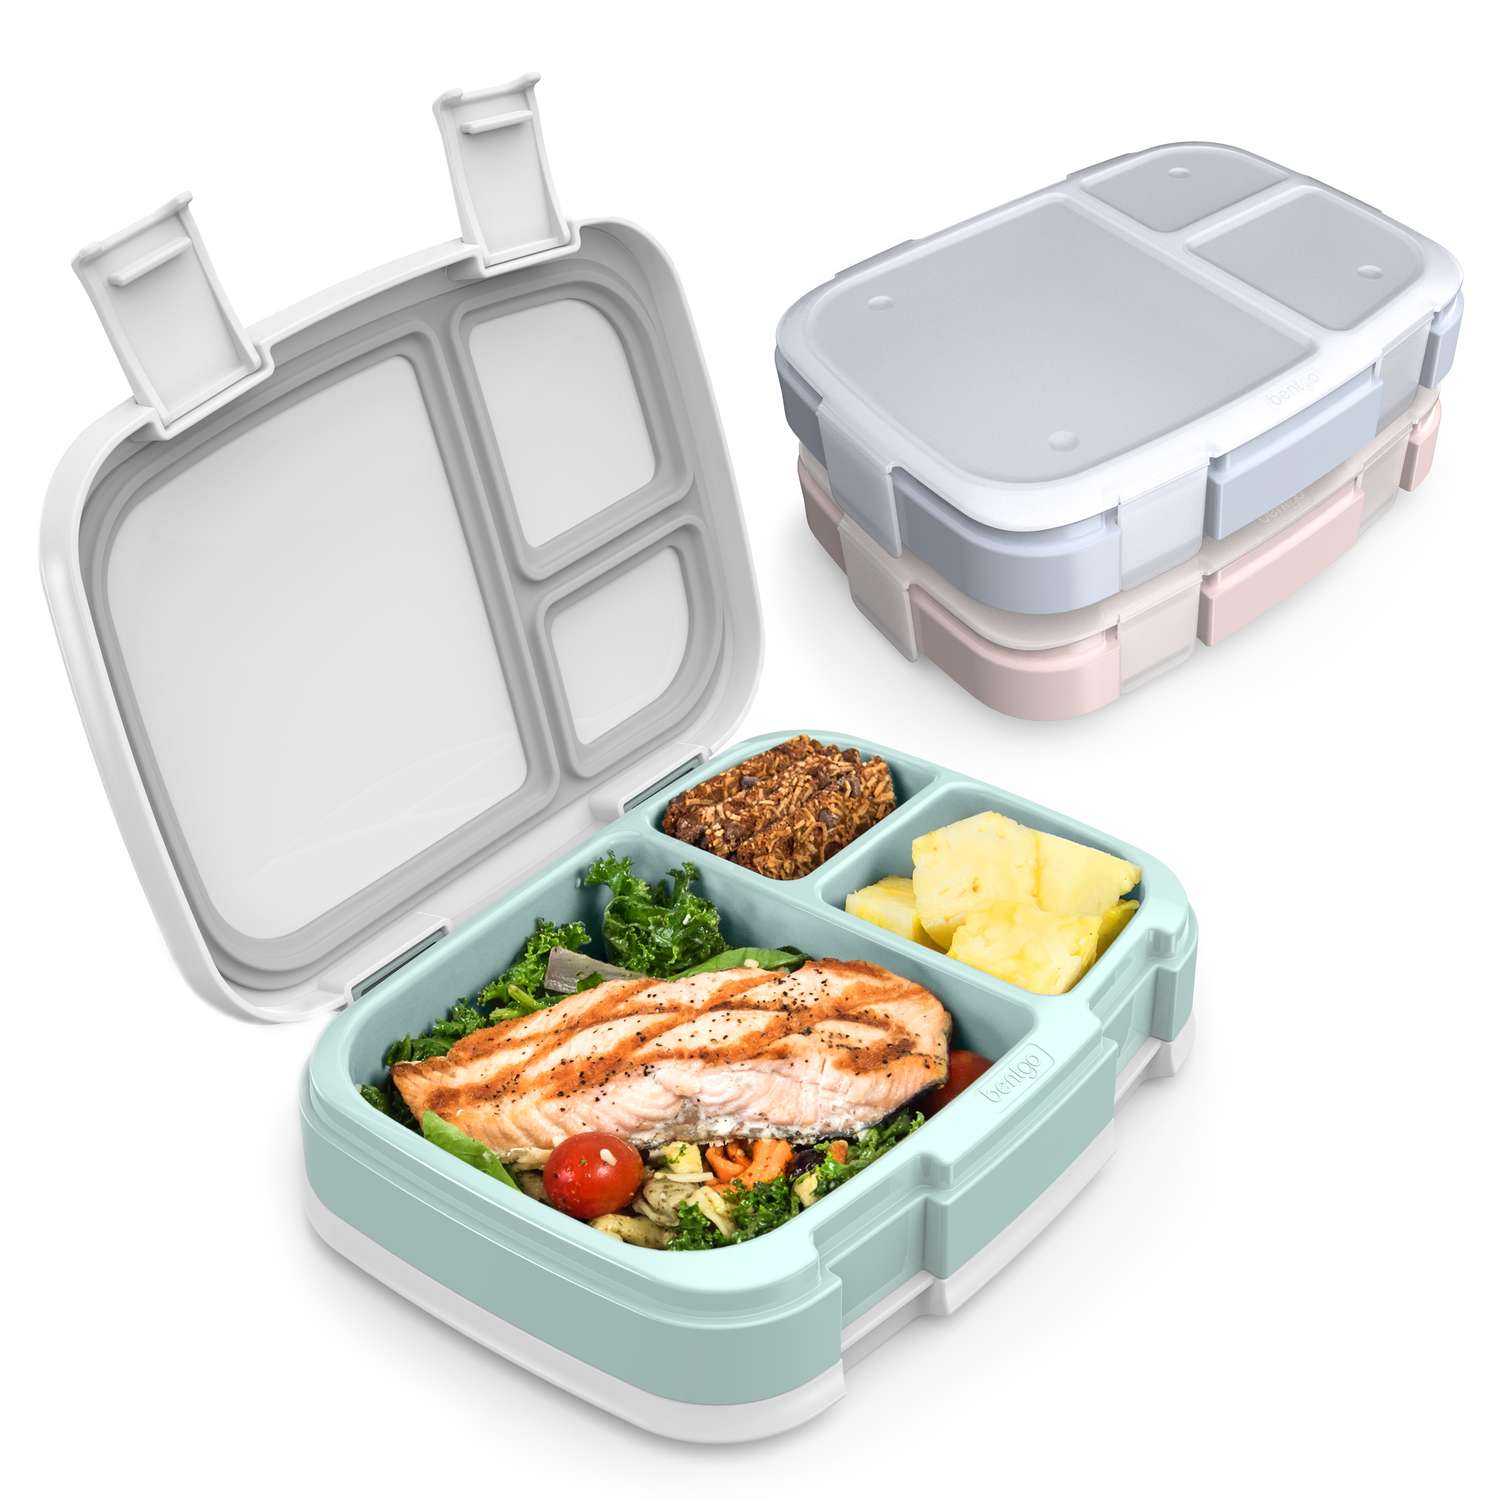 Bentgo Fresh 3-Compartment Replacement Tray with Divider Insert (Blue)